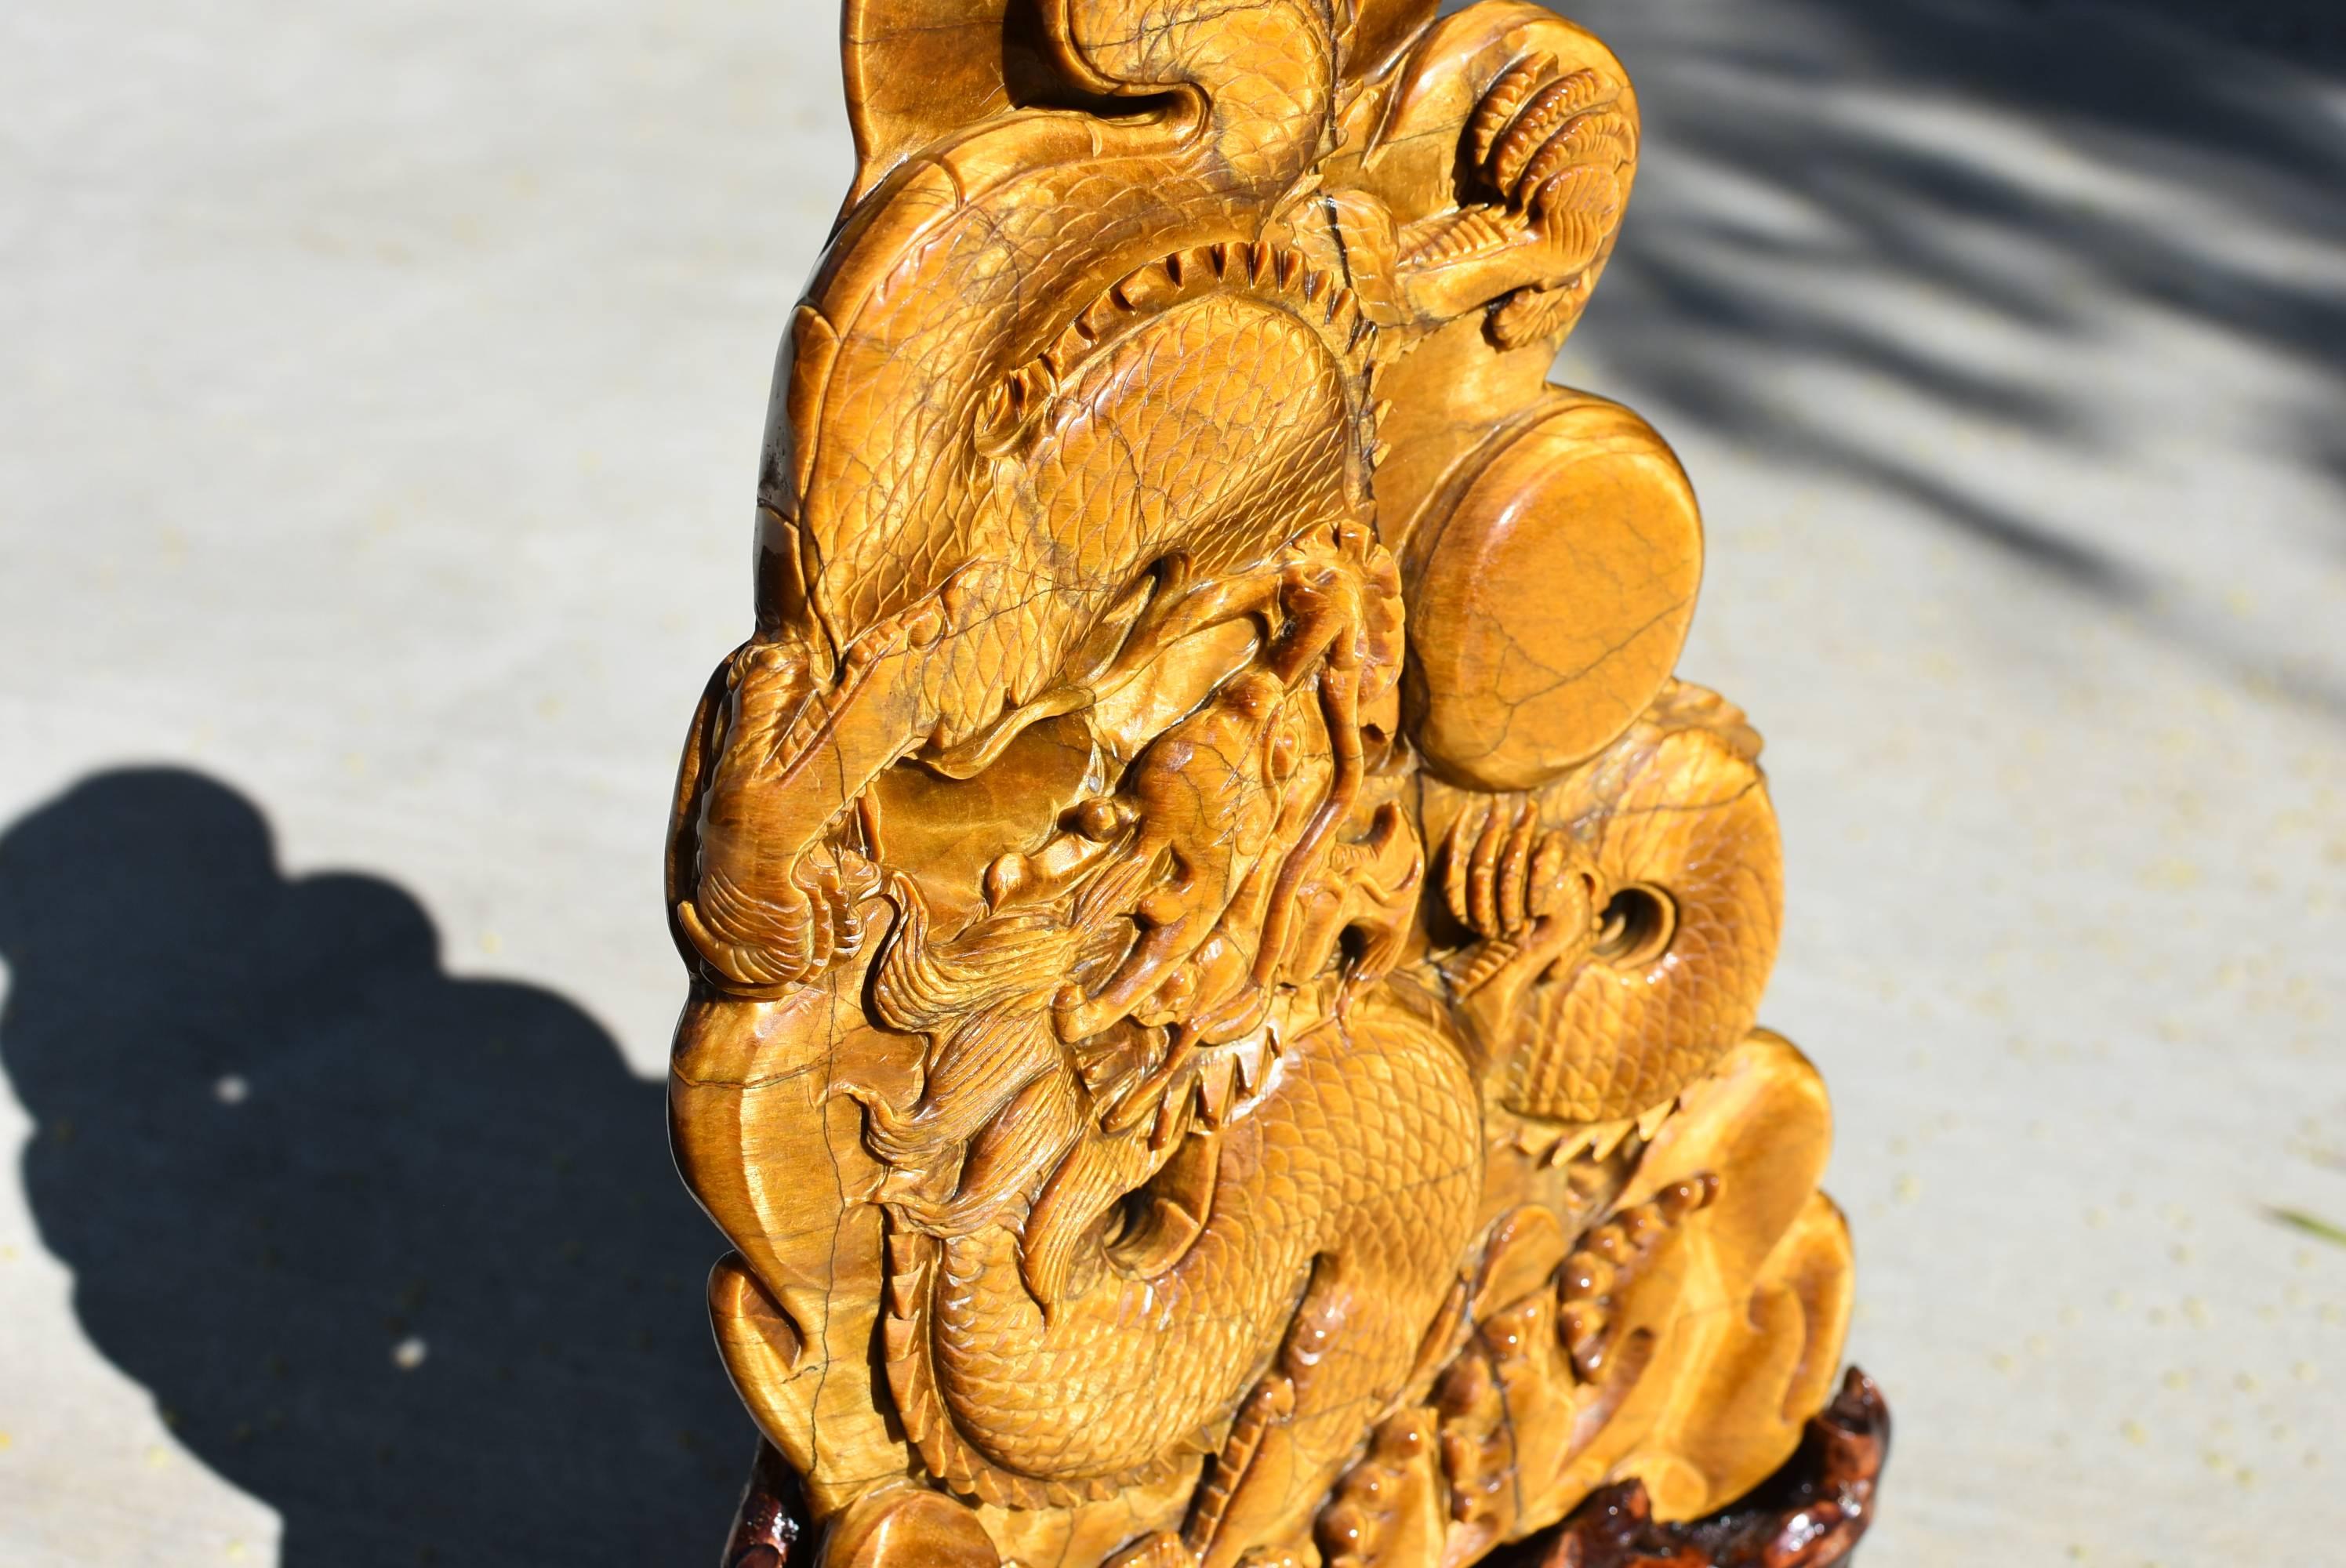 Chinese Huge Natural Tiger's Eye Dragon Statue, 3.4 lb, Hand-Carved Gemstone 